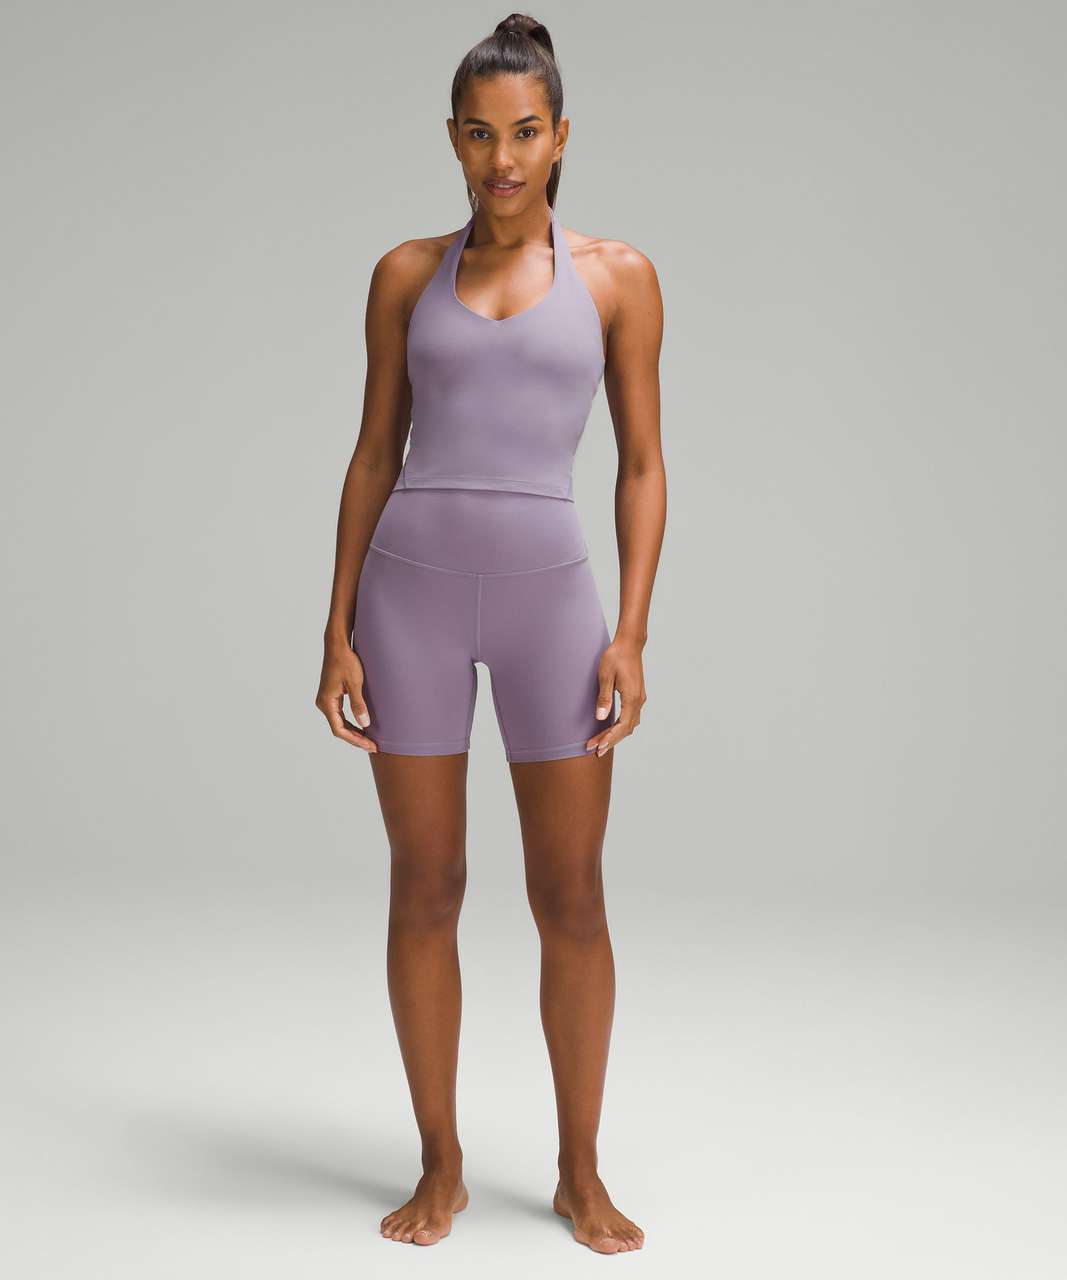 Lululemon Align Buttery Soft Tank Color is a whole vibe, 'Poolside